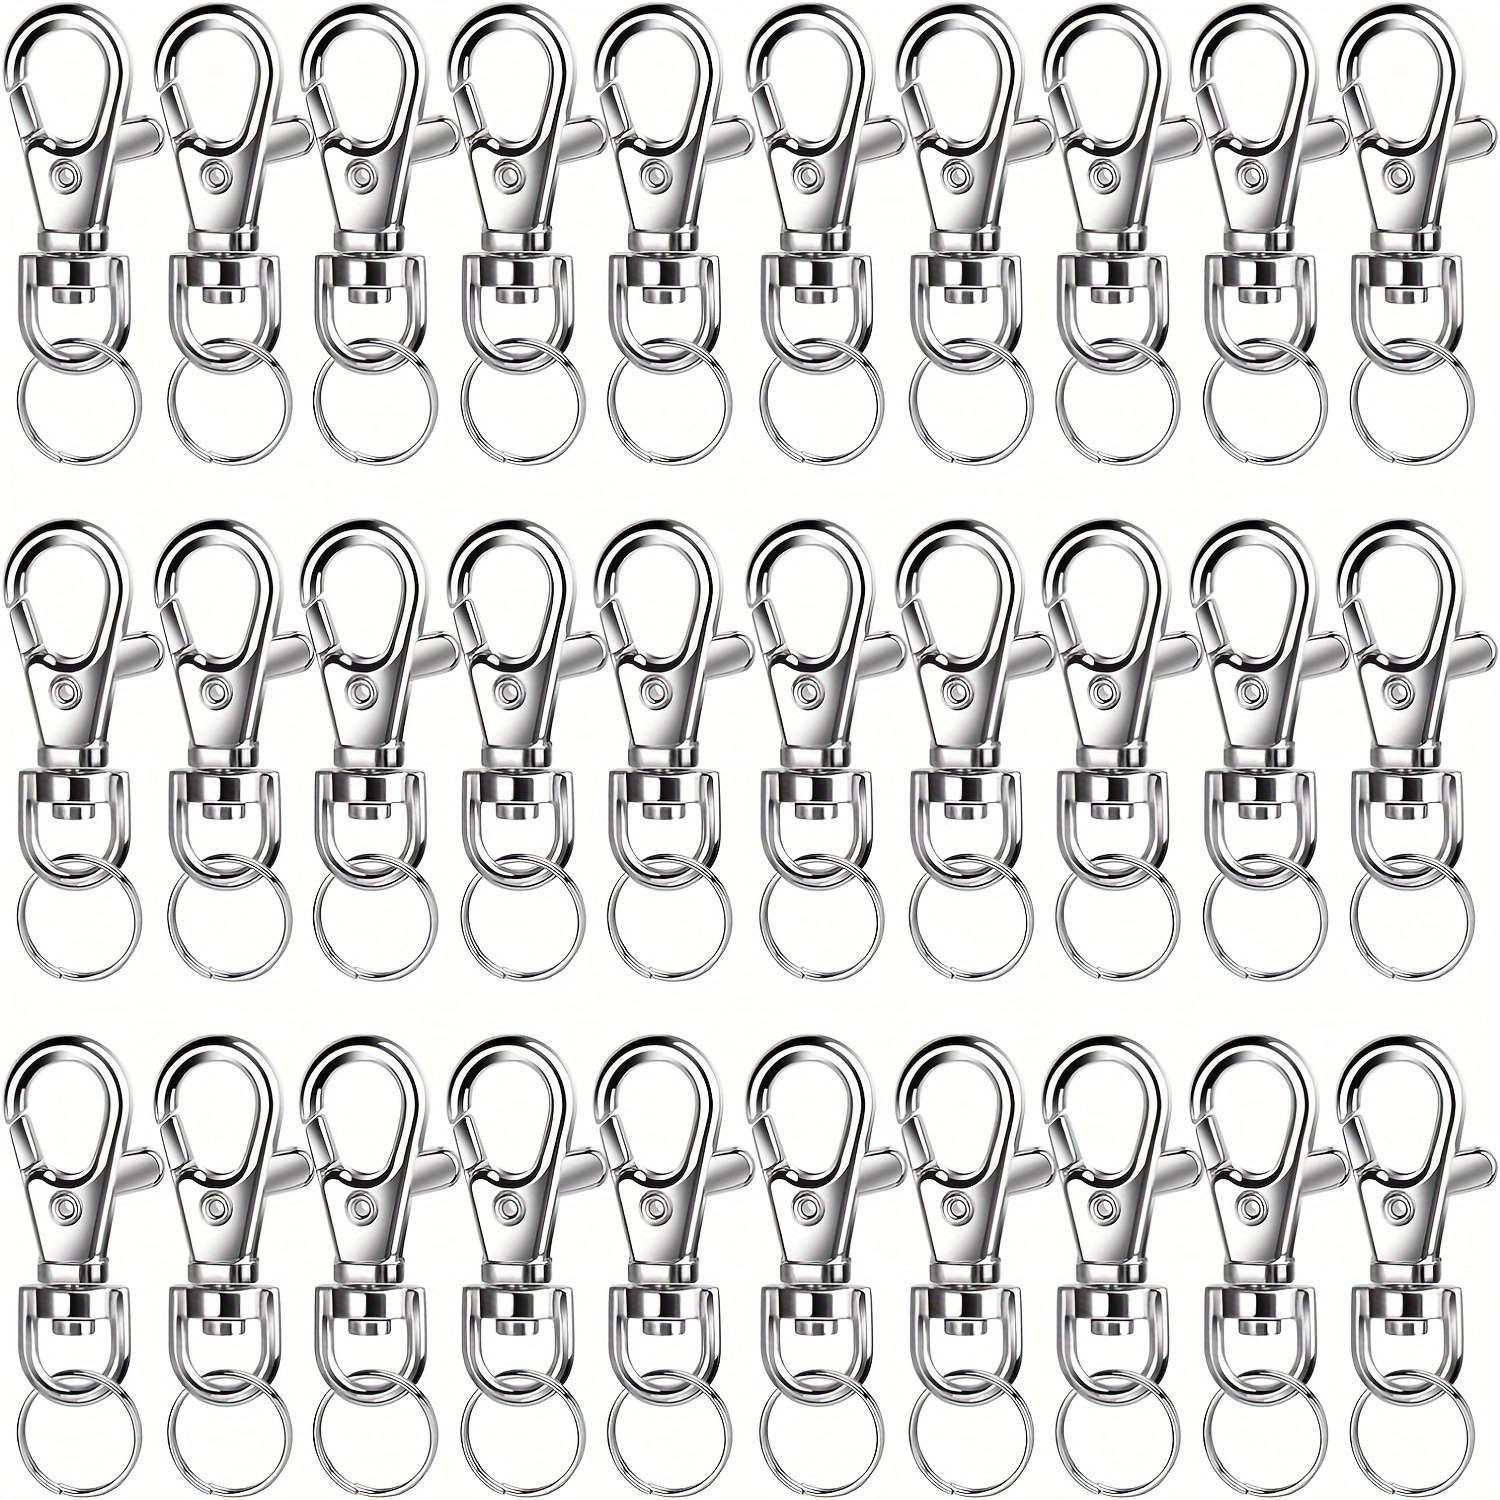 

60pcs Mini Metal Swivel Snap Hooks With Key Rings, Small Lobster Claw Keychains Clasps And Key Chain Ring For Keychain Clip, Lanyard, Key, Jewelry Making, Art Crafts, Silver